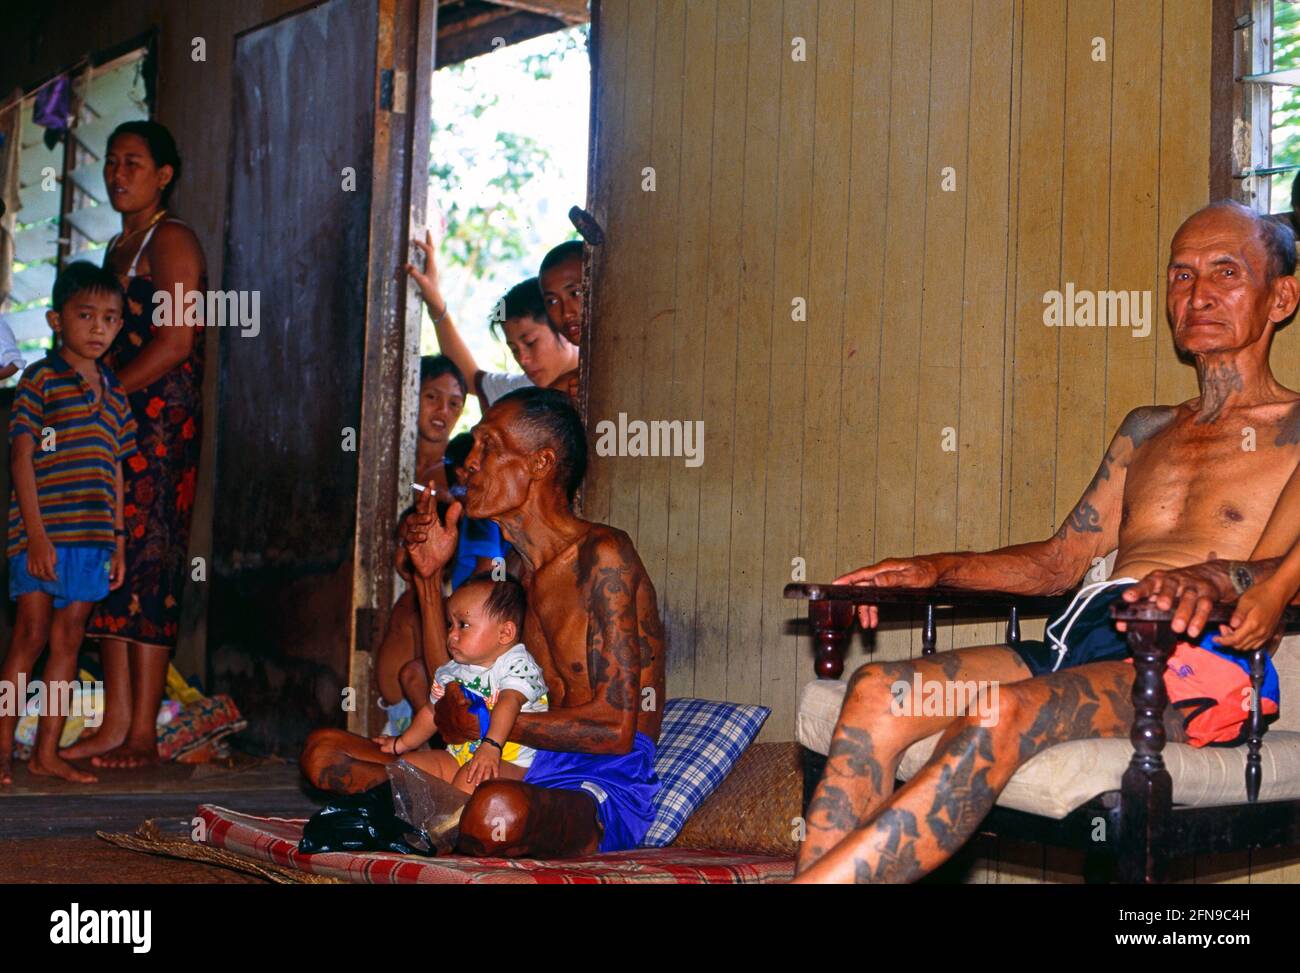 Malaysia/Borneo: Older Iban Headhunter sitting in a typical long house with lot's of kids around Stock Photo